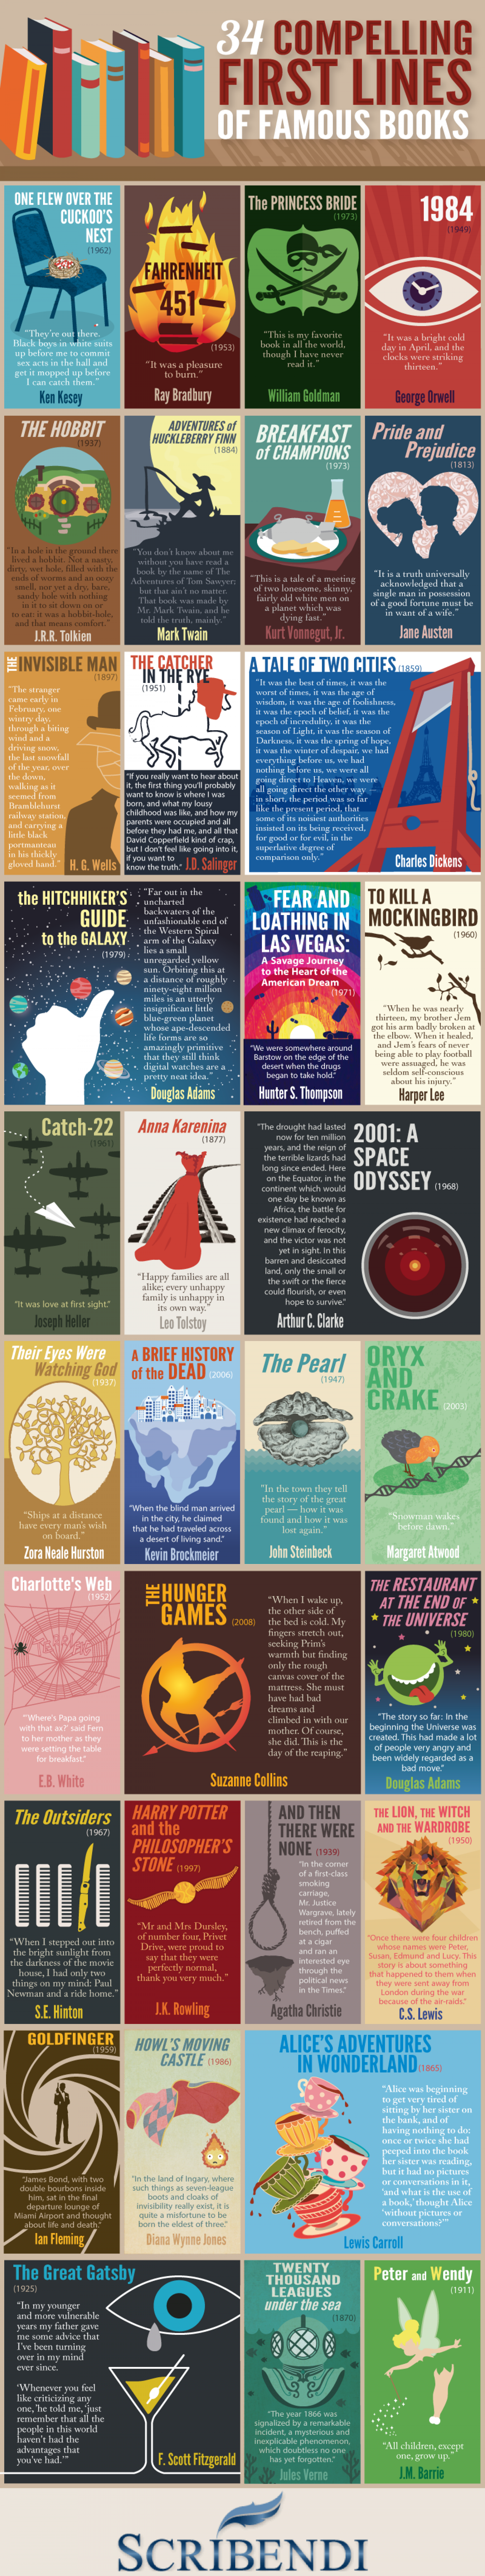 34 Compelling First Lines of Famous Books Infographic